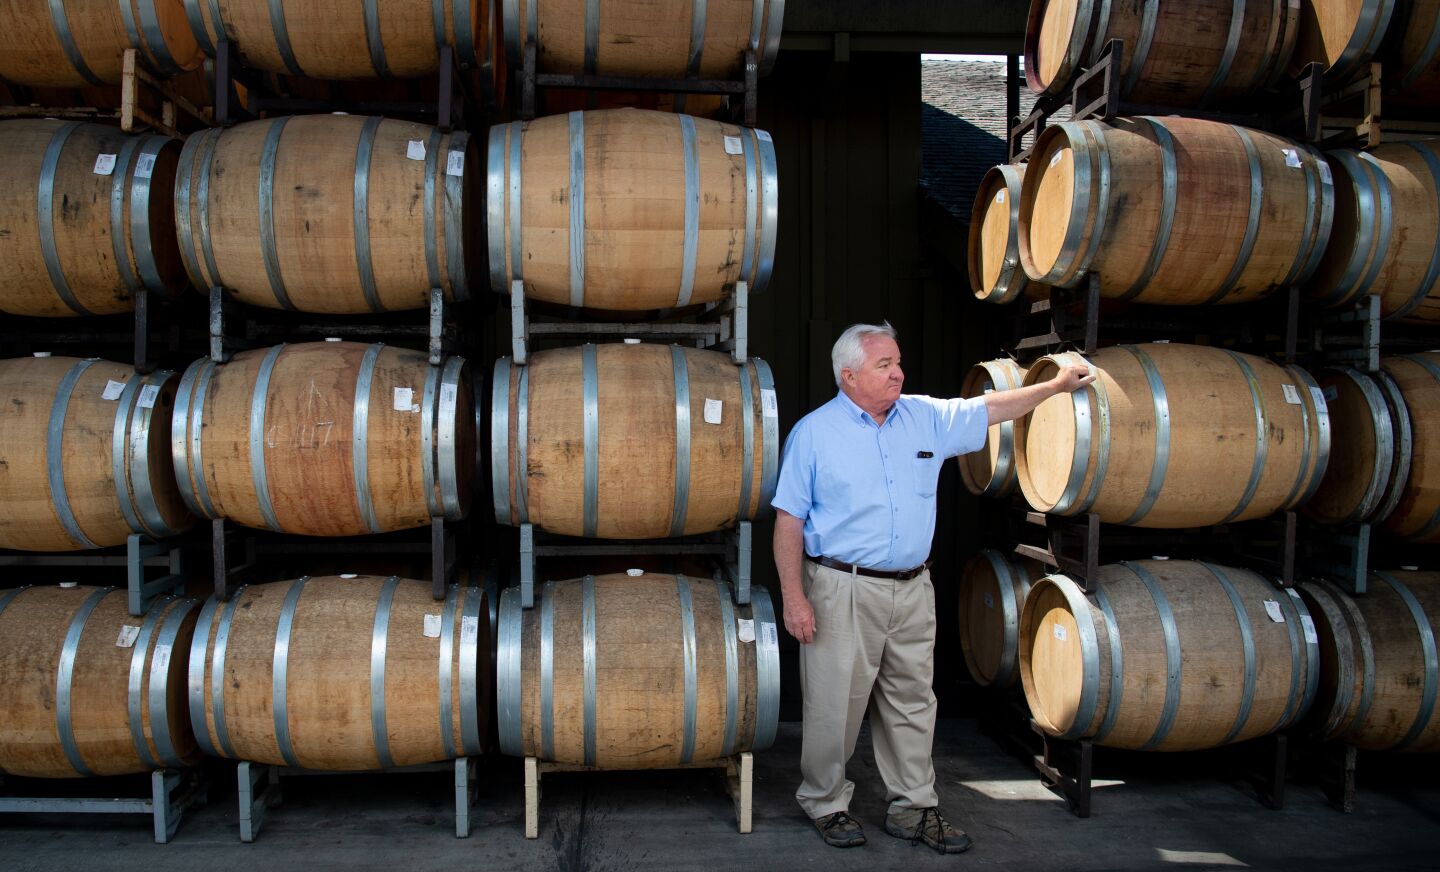 Hank Wetzel stands between stacks of stored barrels of wine at Alexander Valley Vineyards. Wetzel says he voted for President Trump because “he was a businessman… But in the short term, these tariffs are not working.”